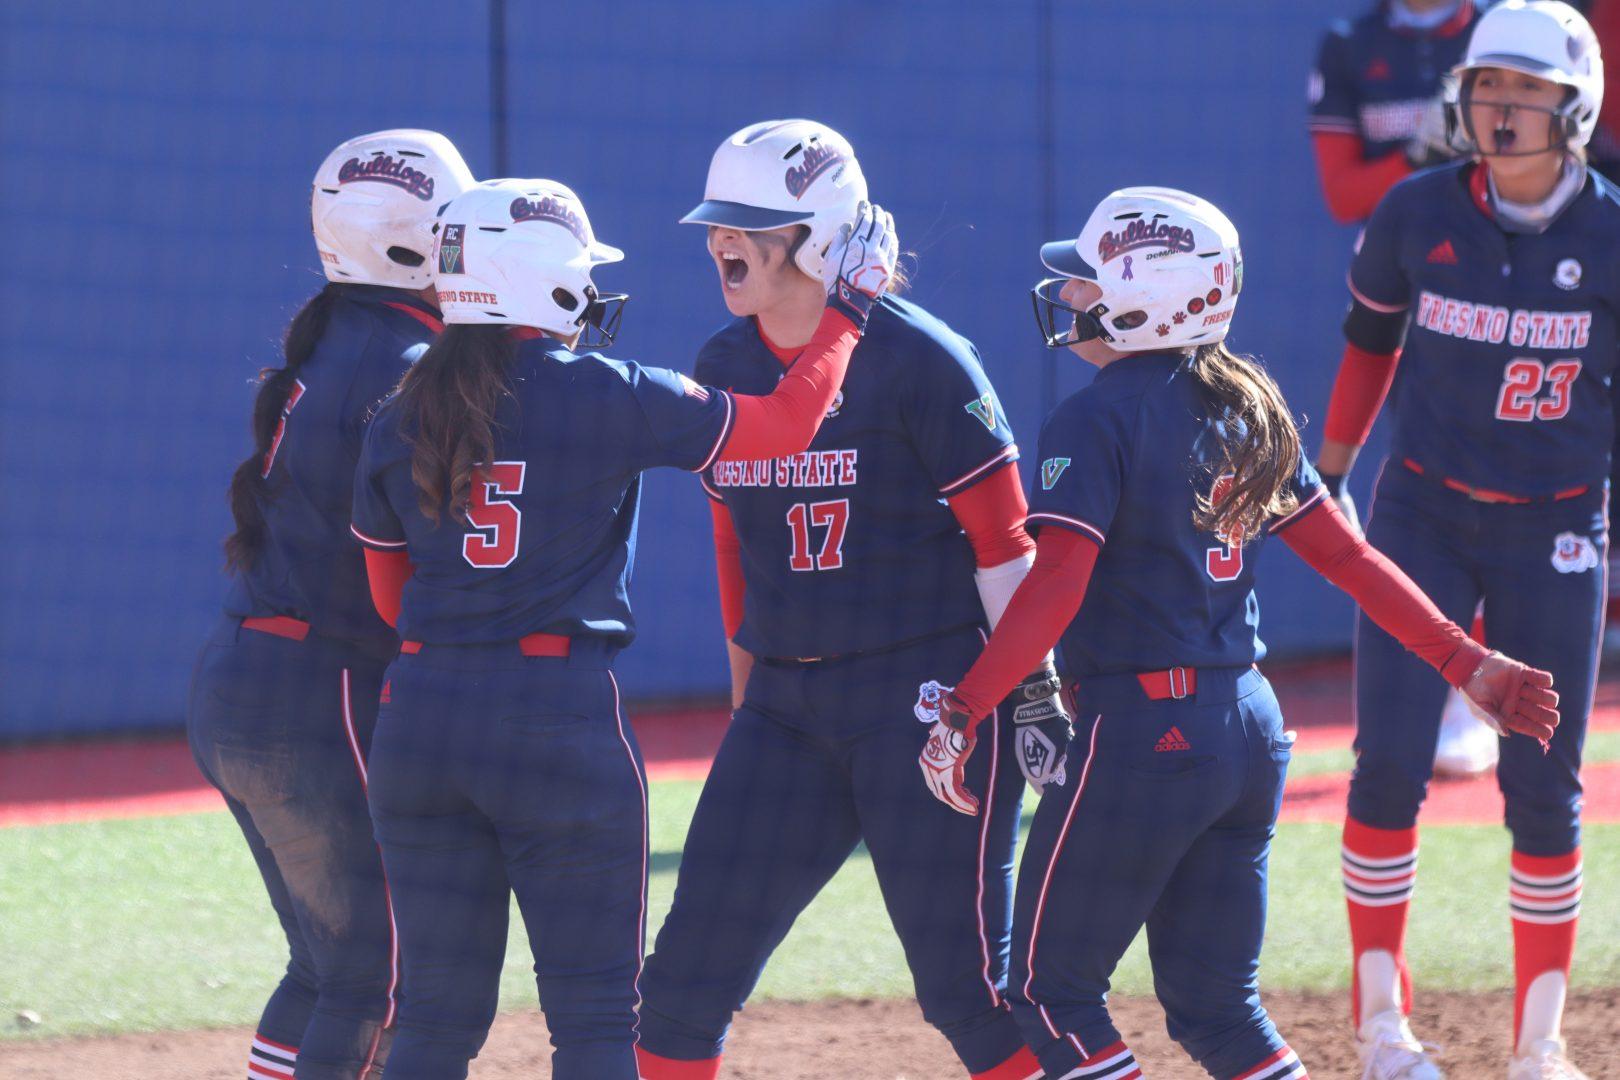 The Fresno State Bulldogs celebrate after catcher Kelcey Carrasco (17) hits a home run with bases loaded during their game against San Jose State at Margie Wright Diamond on Saturday, March 20, 2021. (Kameron Thorn/The Collegian)